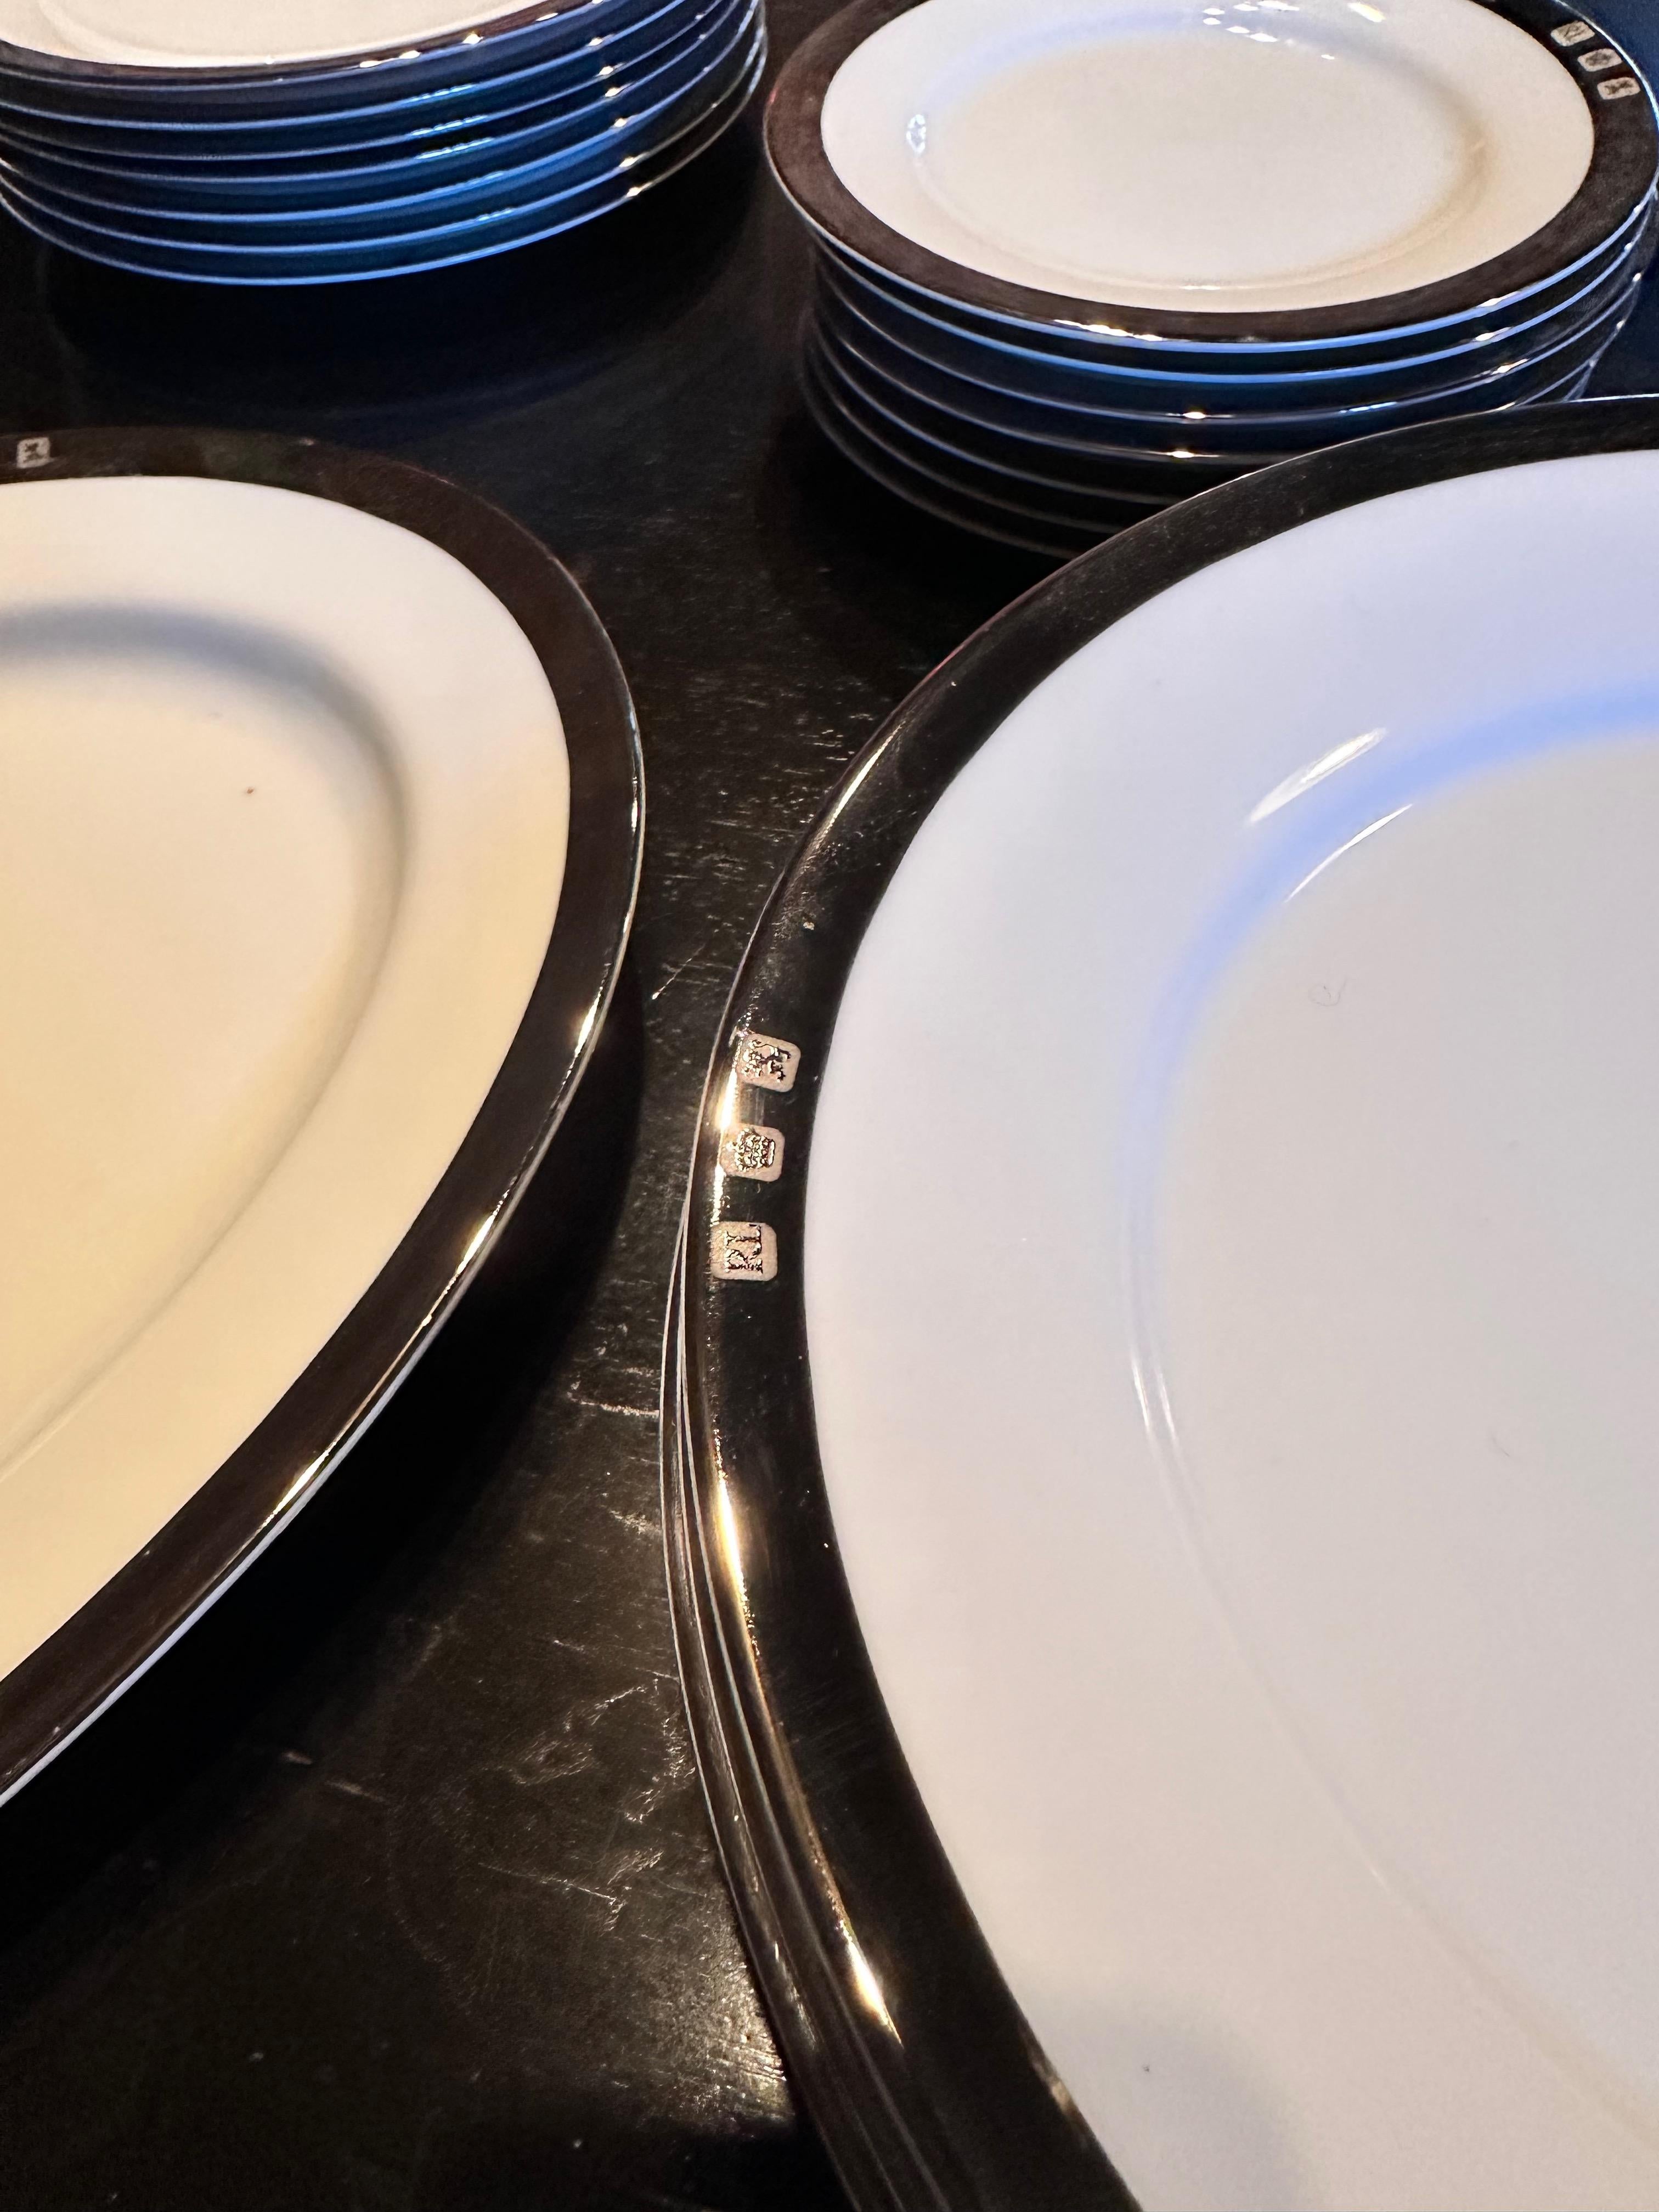 A set of 8 (eight) place settings in the Academy Platinum pattern by Ralph Lauren Home collection. Bone china. Signed. Imported, production period 1995-2002.

Features a platinum/Silvertone border on white.

This set includes:
8 dinner plates
8